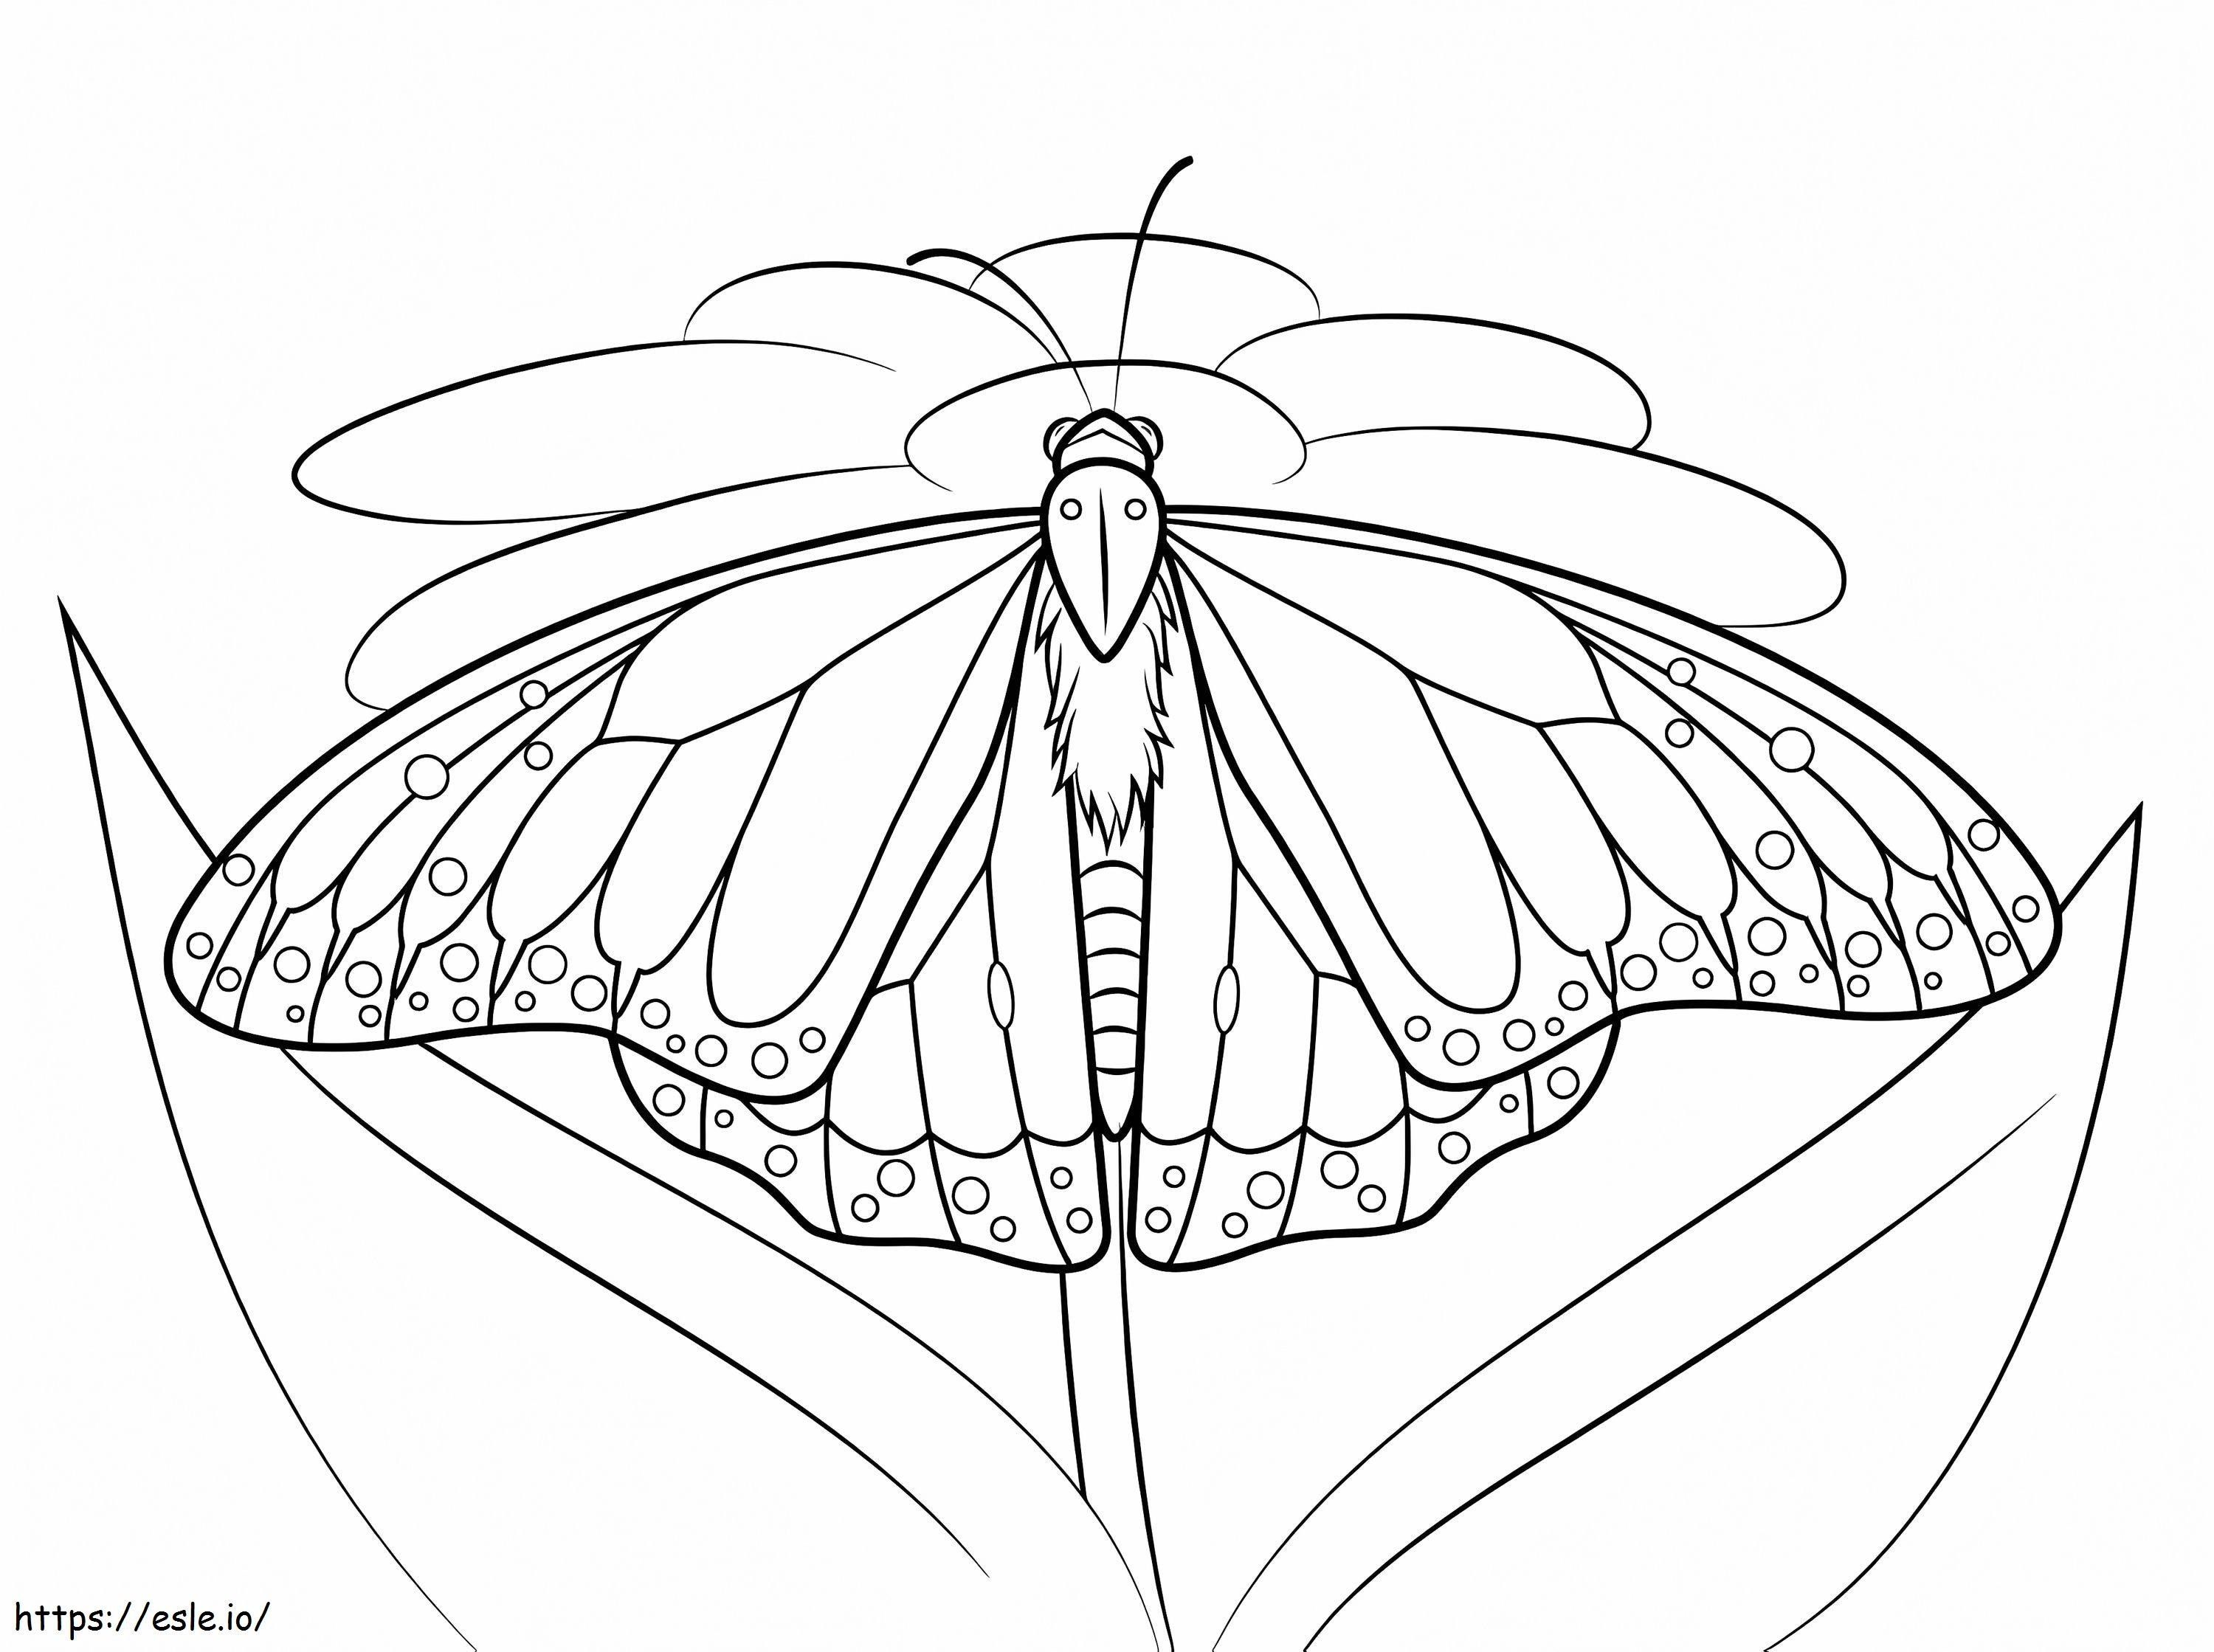 Monarch Butterfly 2 coloring page